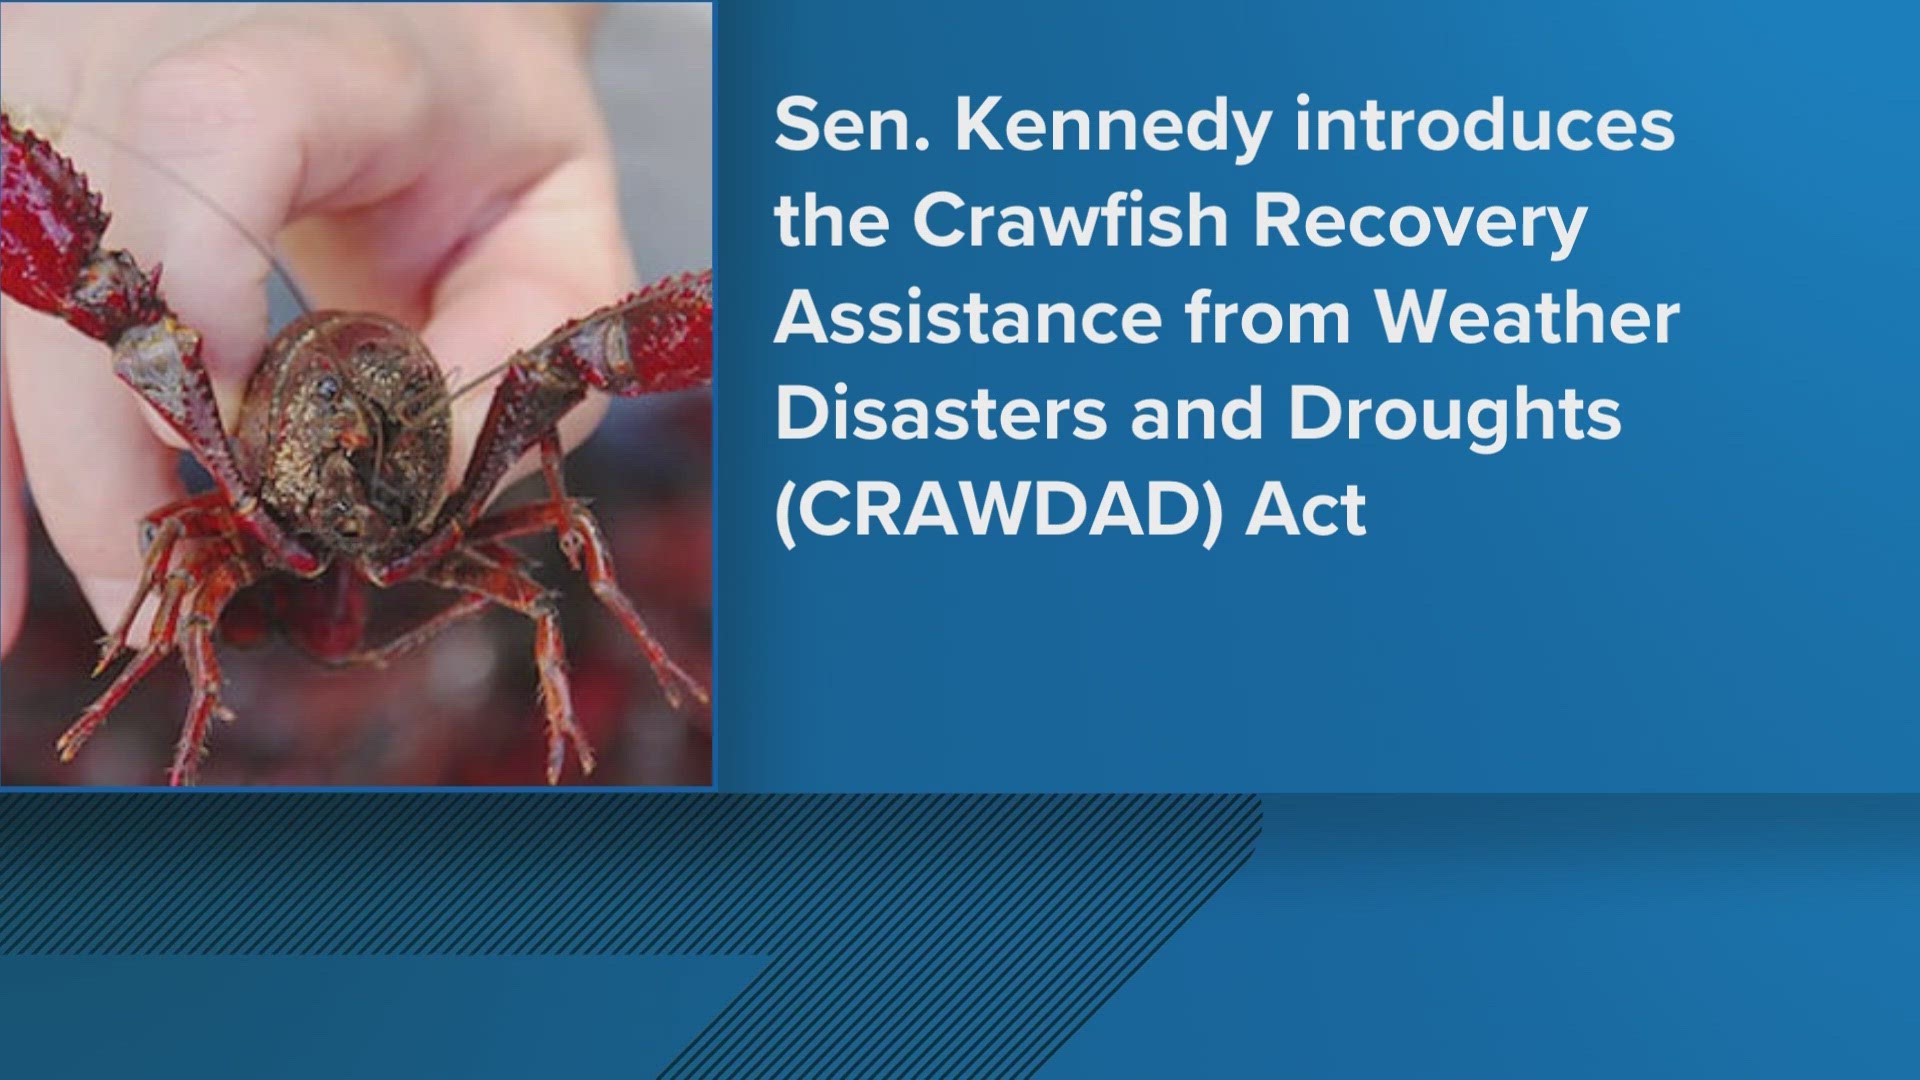 The act was introduced to help assistant farmers in weather disasters and droughts.